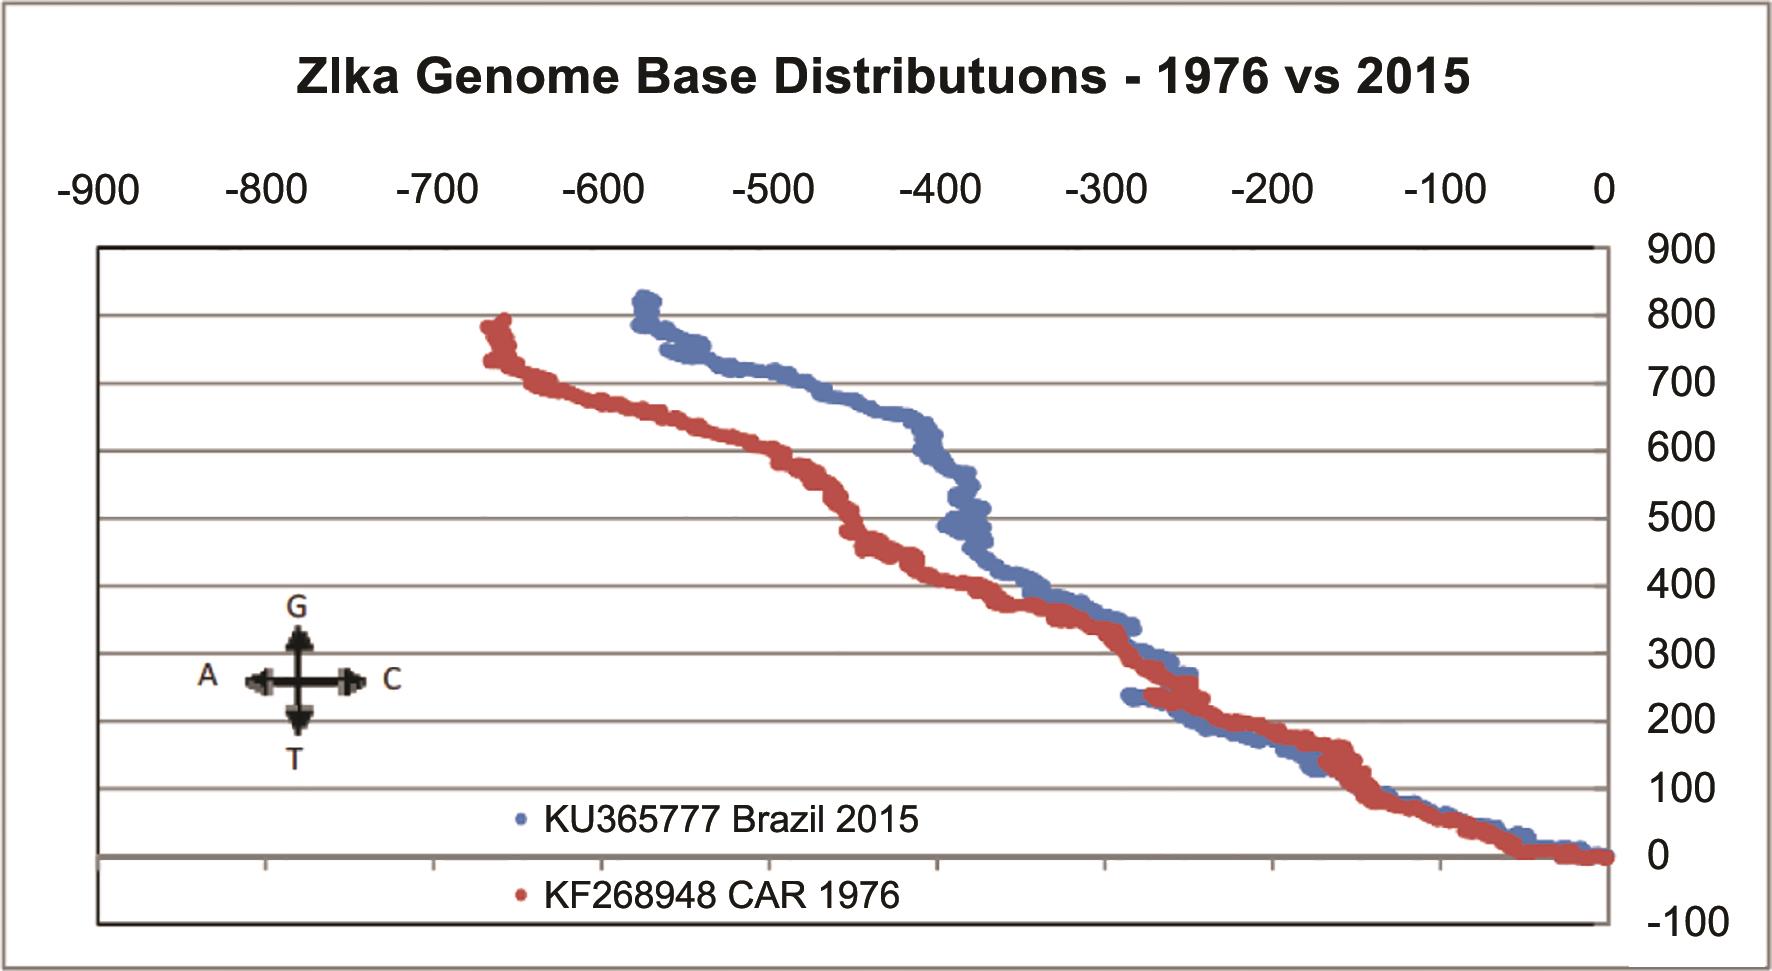 Comparison of ZIKV genomes from Central African Republic 1976 to Brazil 2015 in 2D graphical representation.